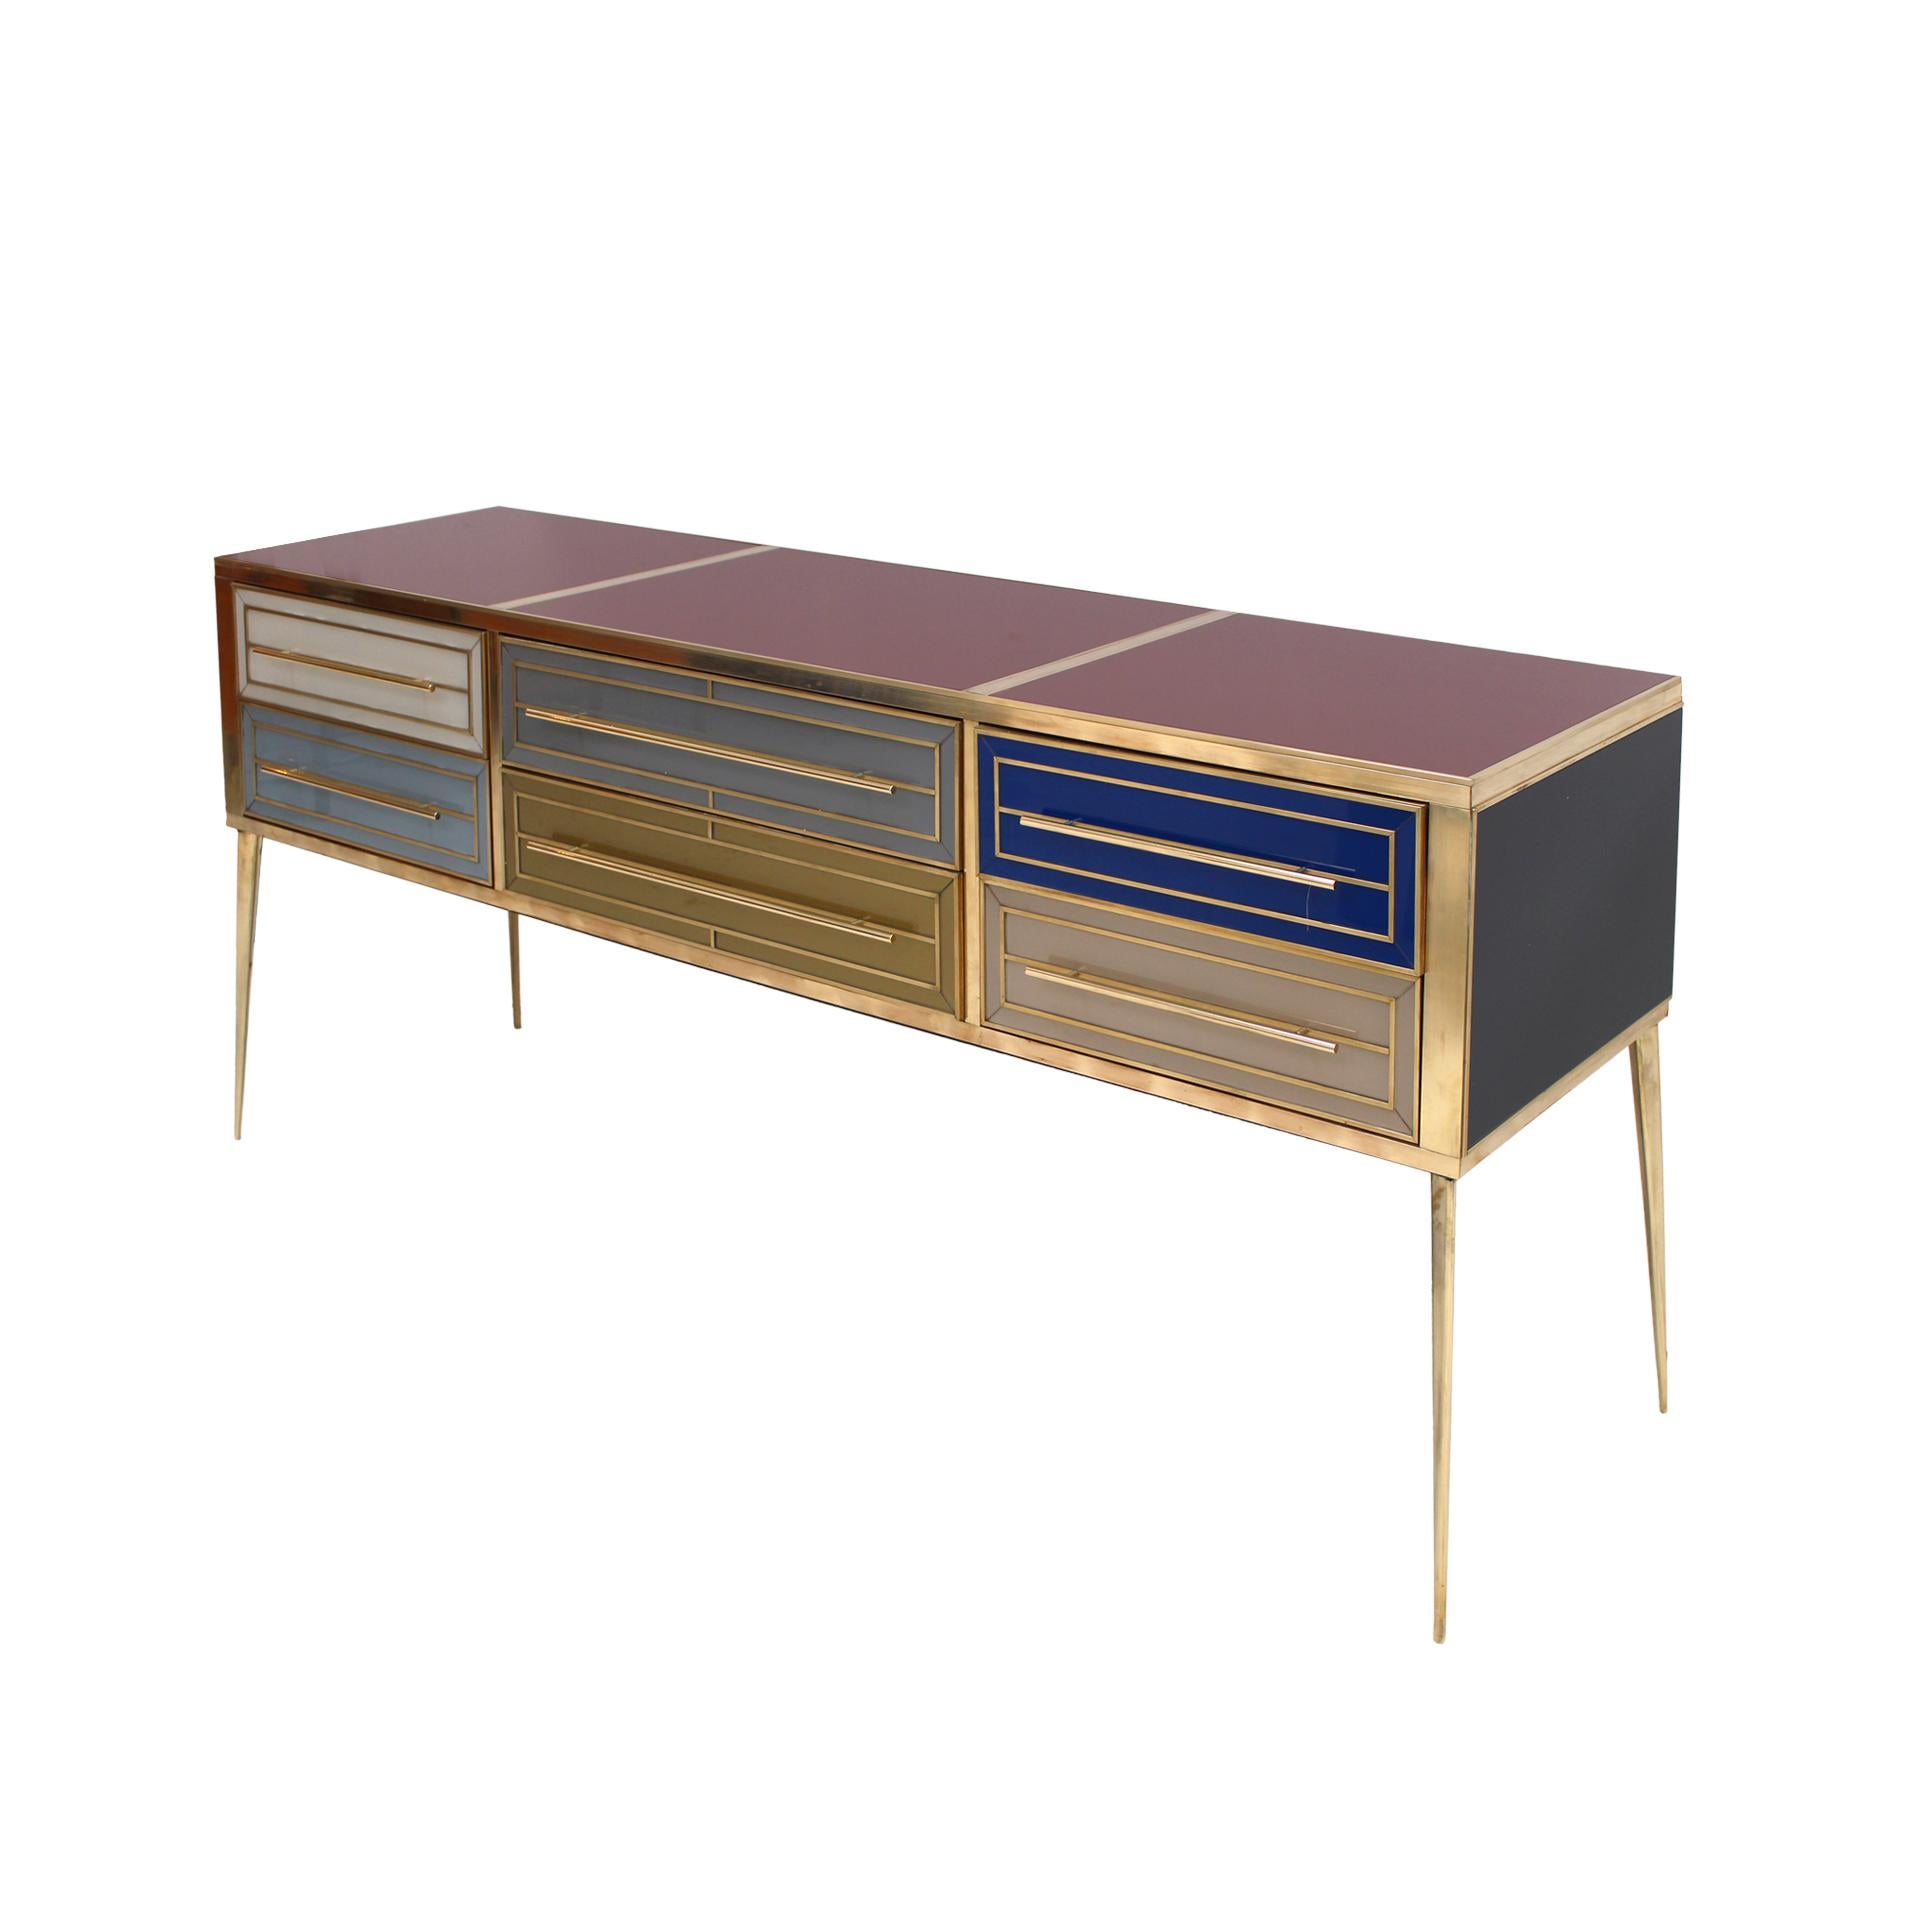 Mid-Century Modern Midcentury Style Italian Sideboard Made of Wood and Covered with Colored Glass For Sale